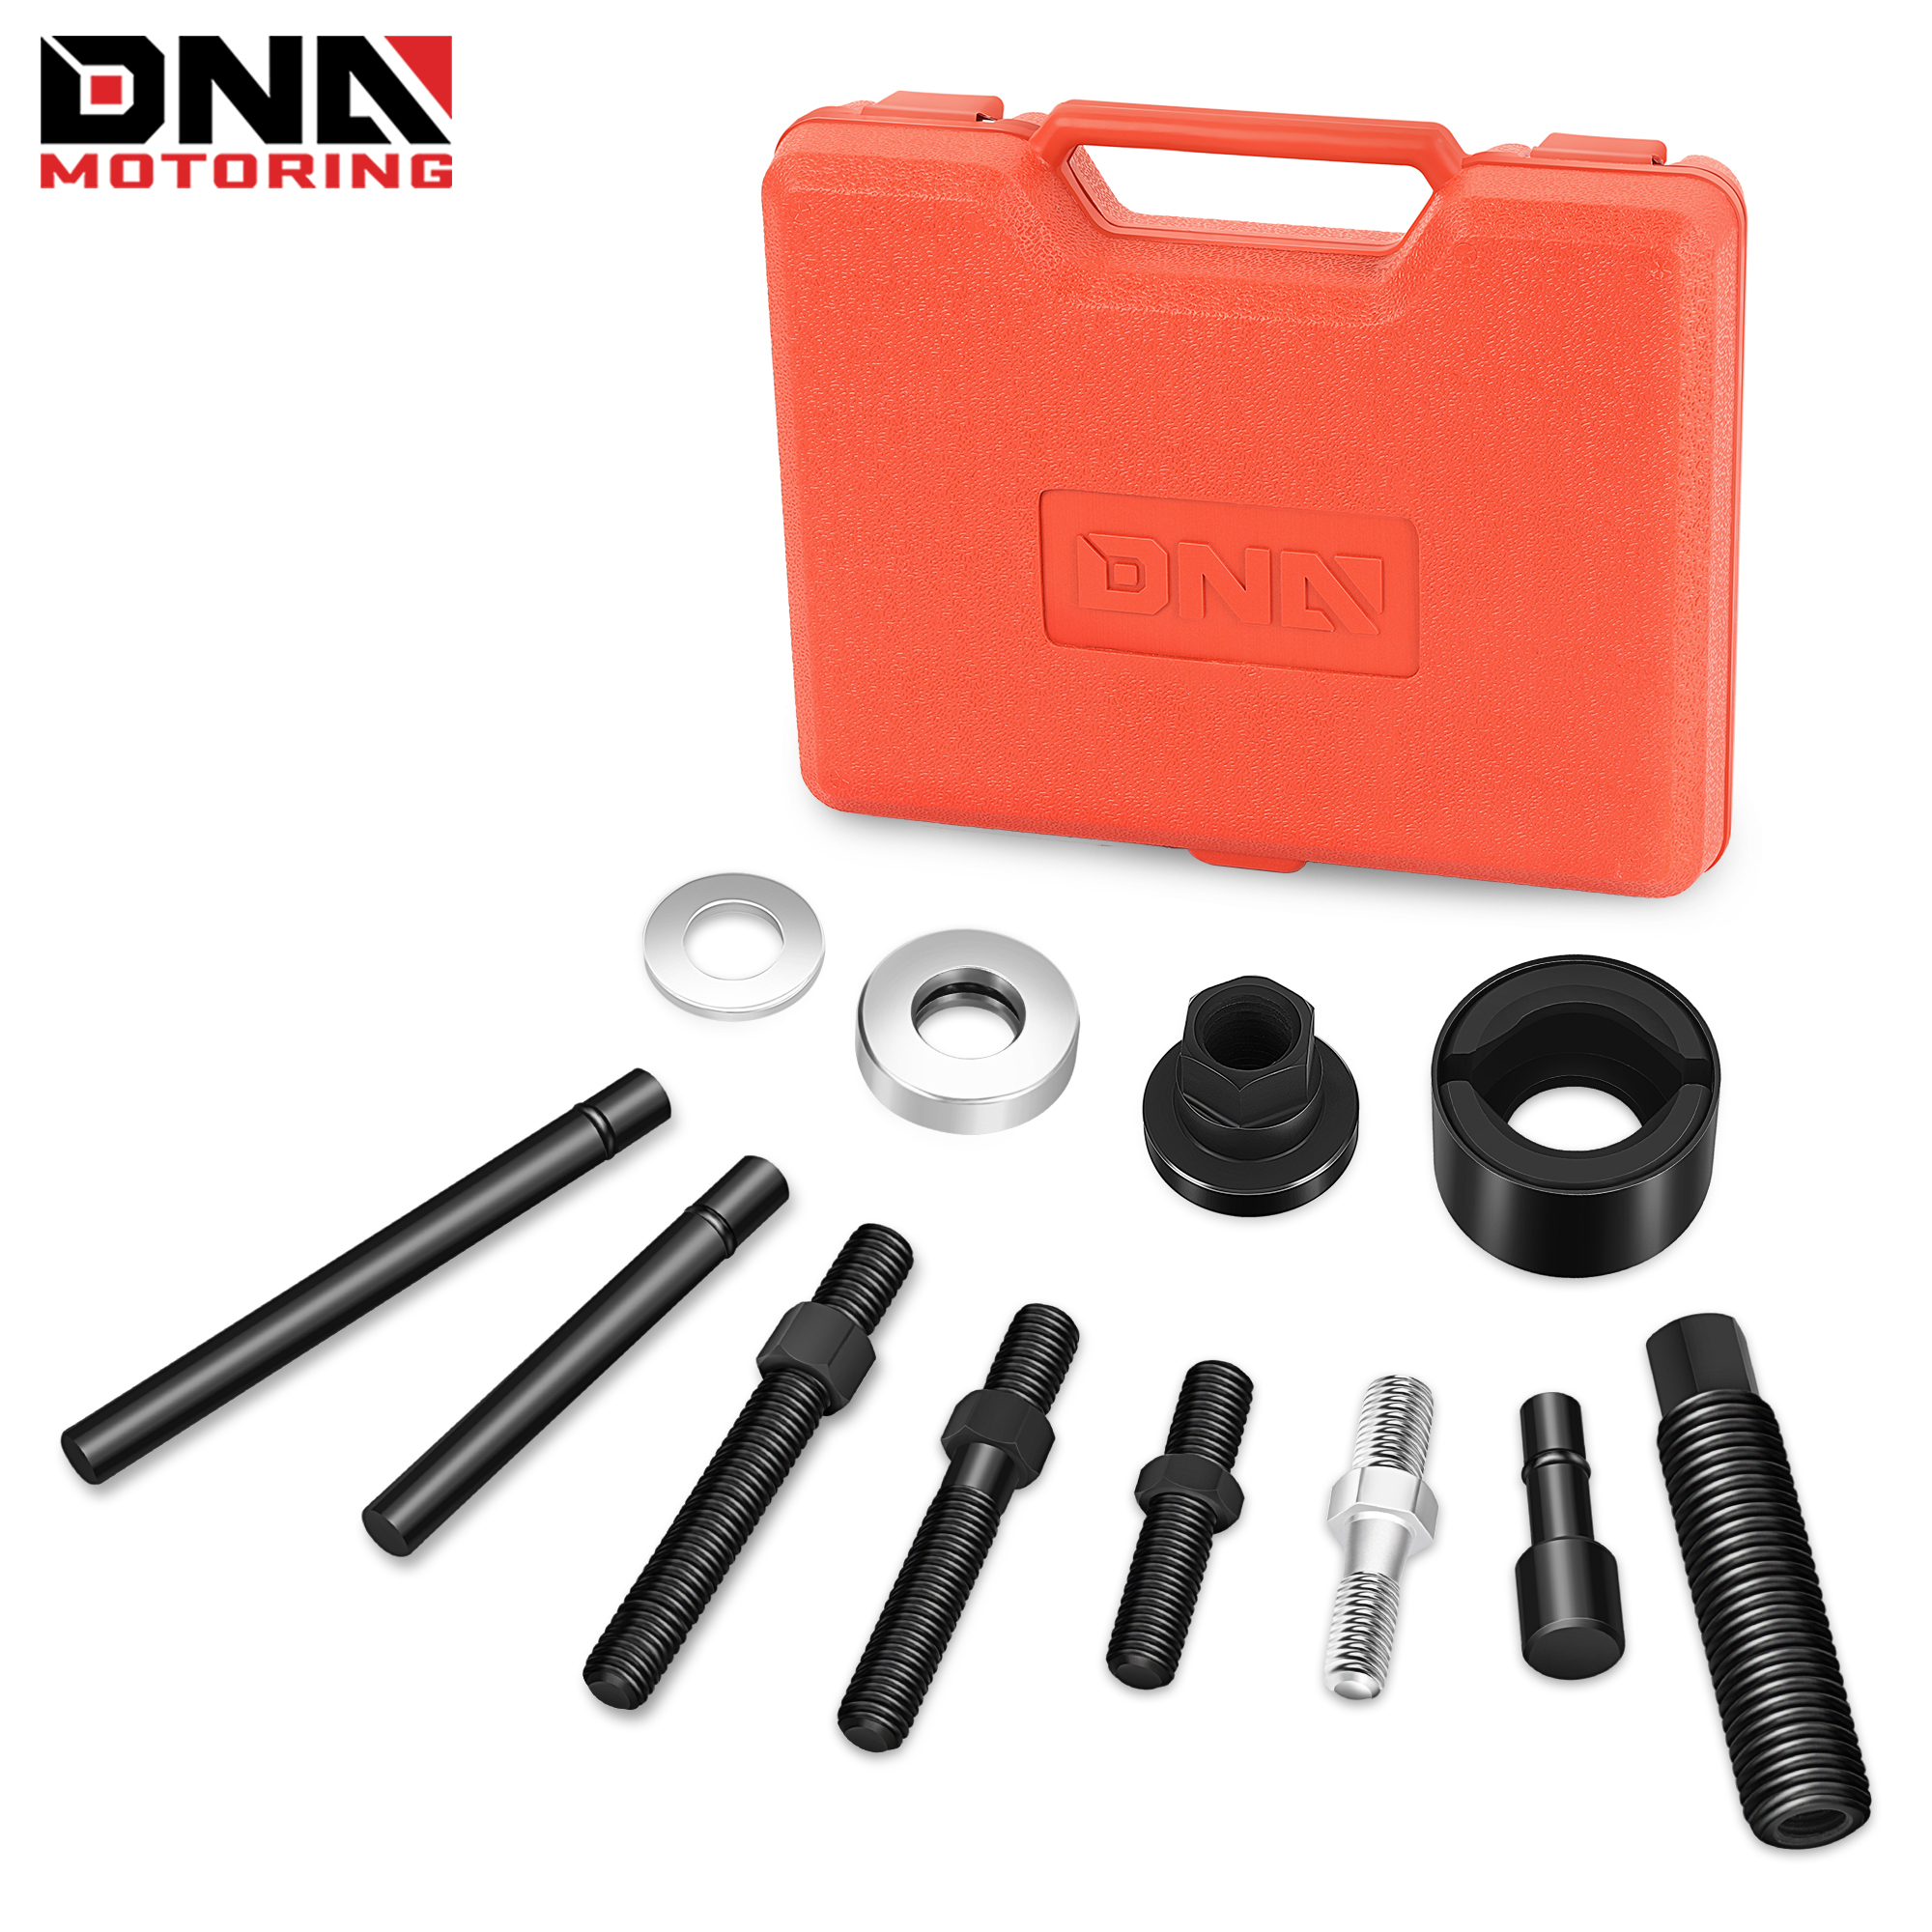 

12pcs Power Steering Pulley Puller Remover And Installer Tool Kit On Most Engines,tools-00295